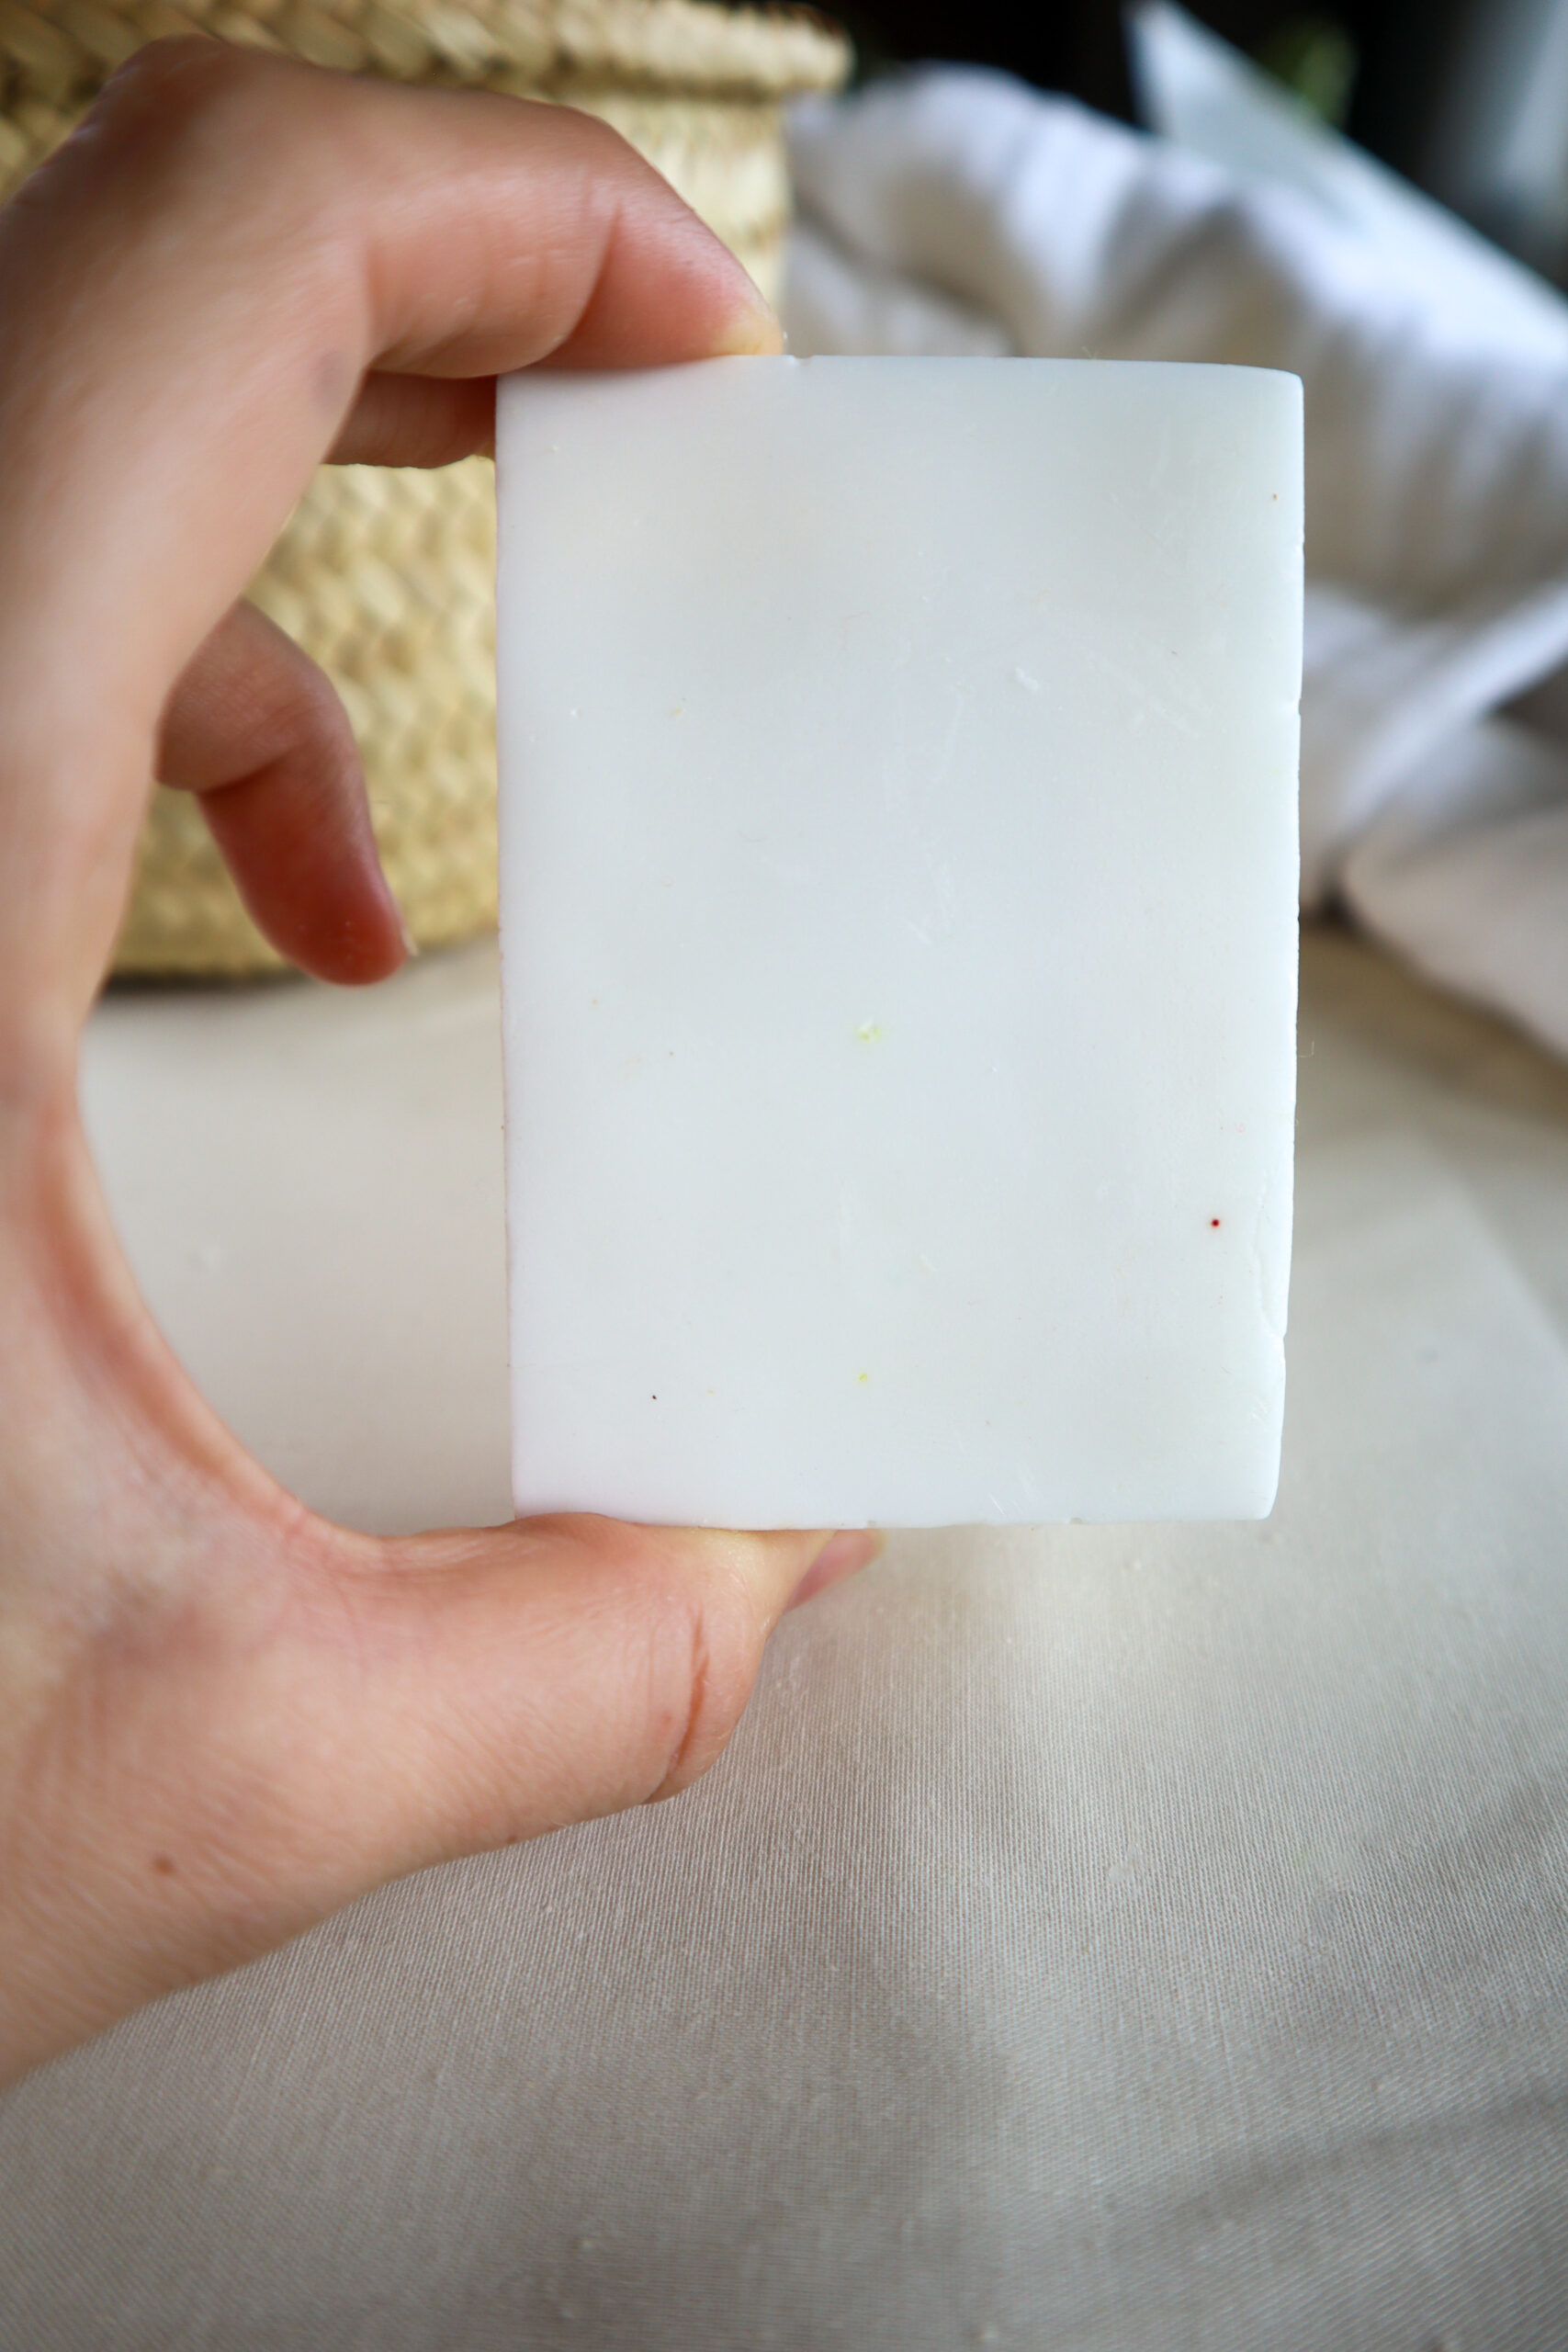 hand holding white soap block in a bathroom